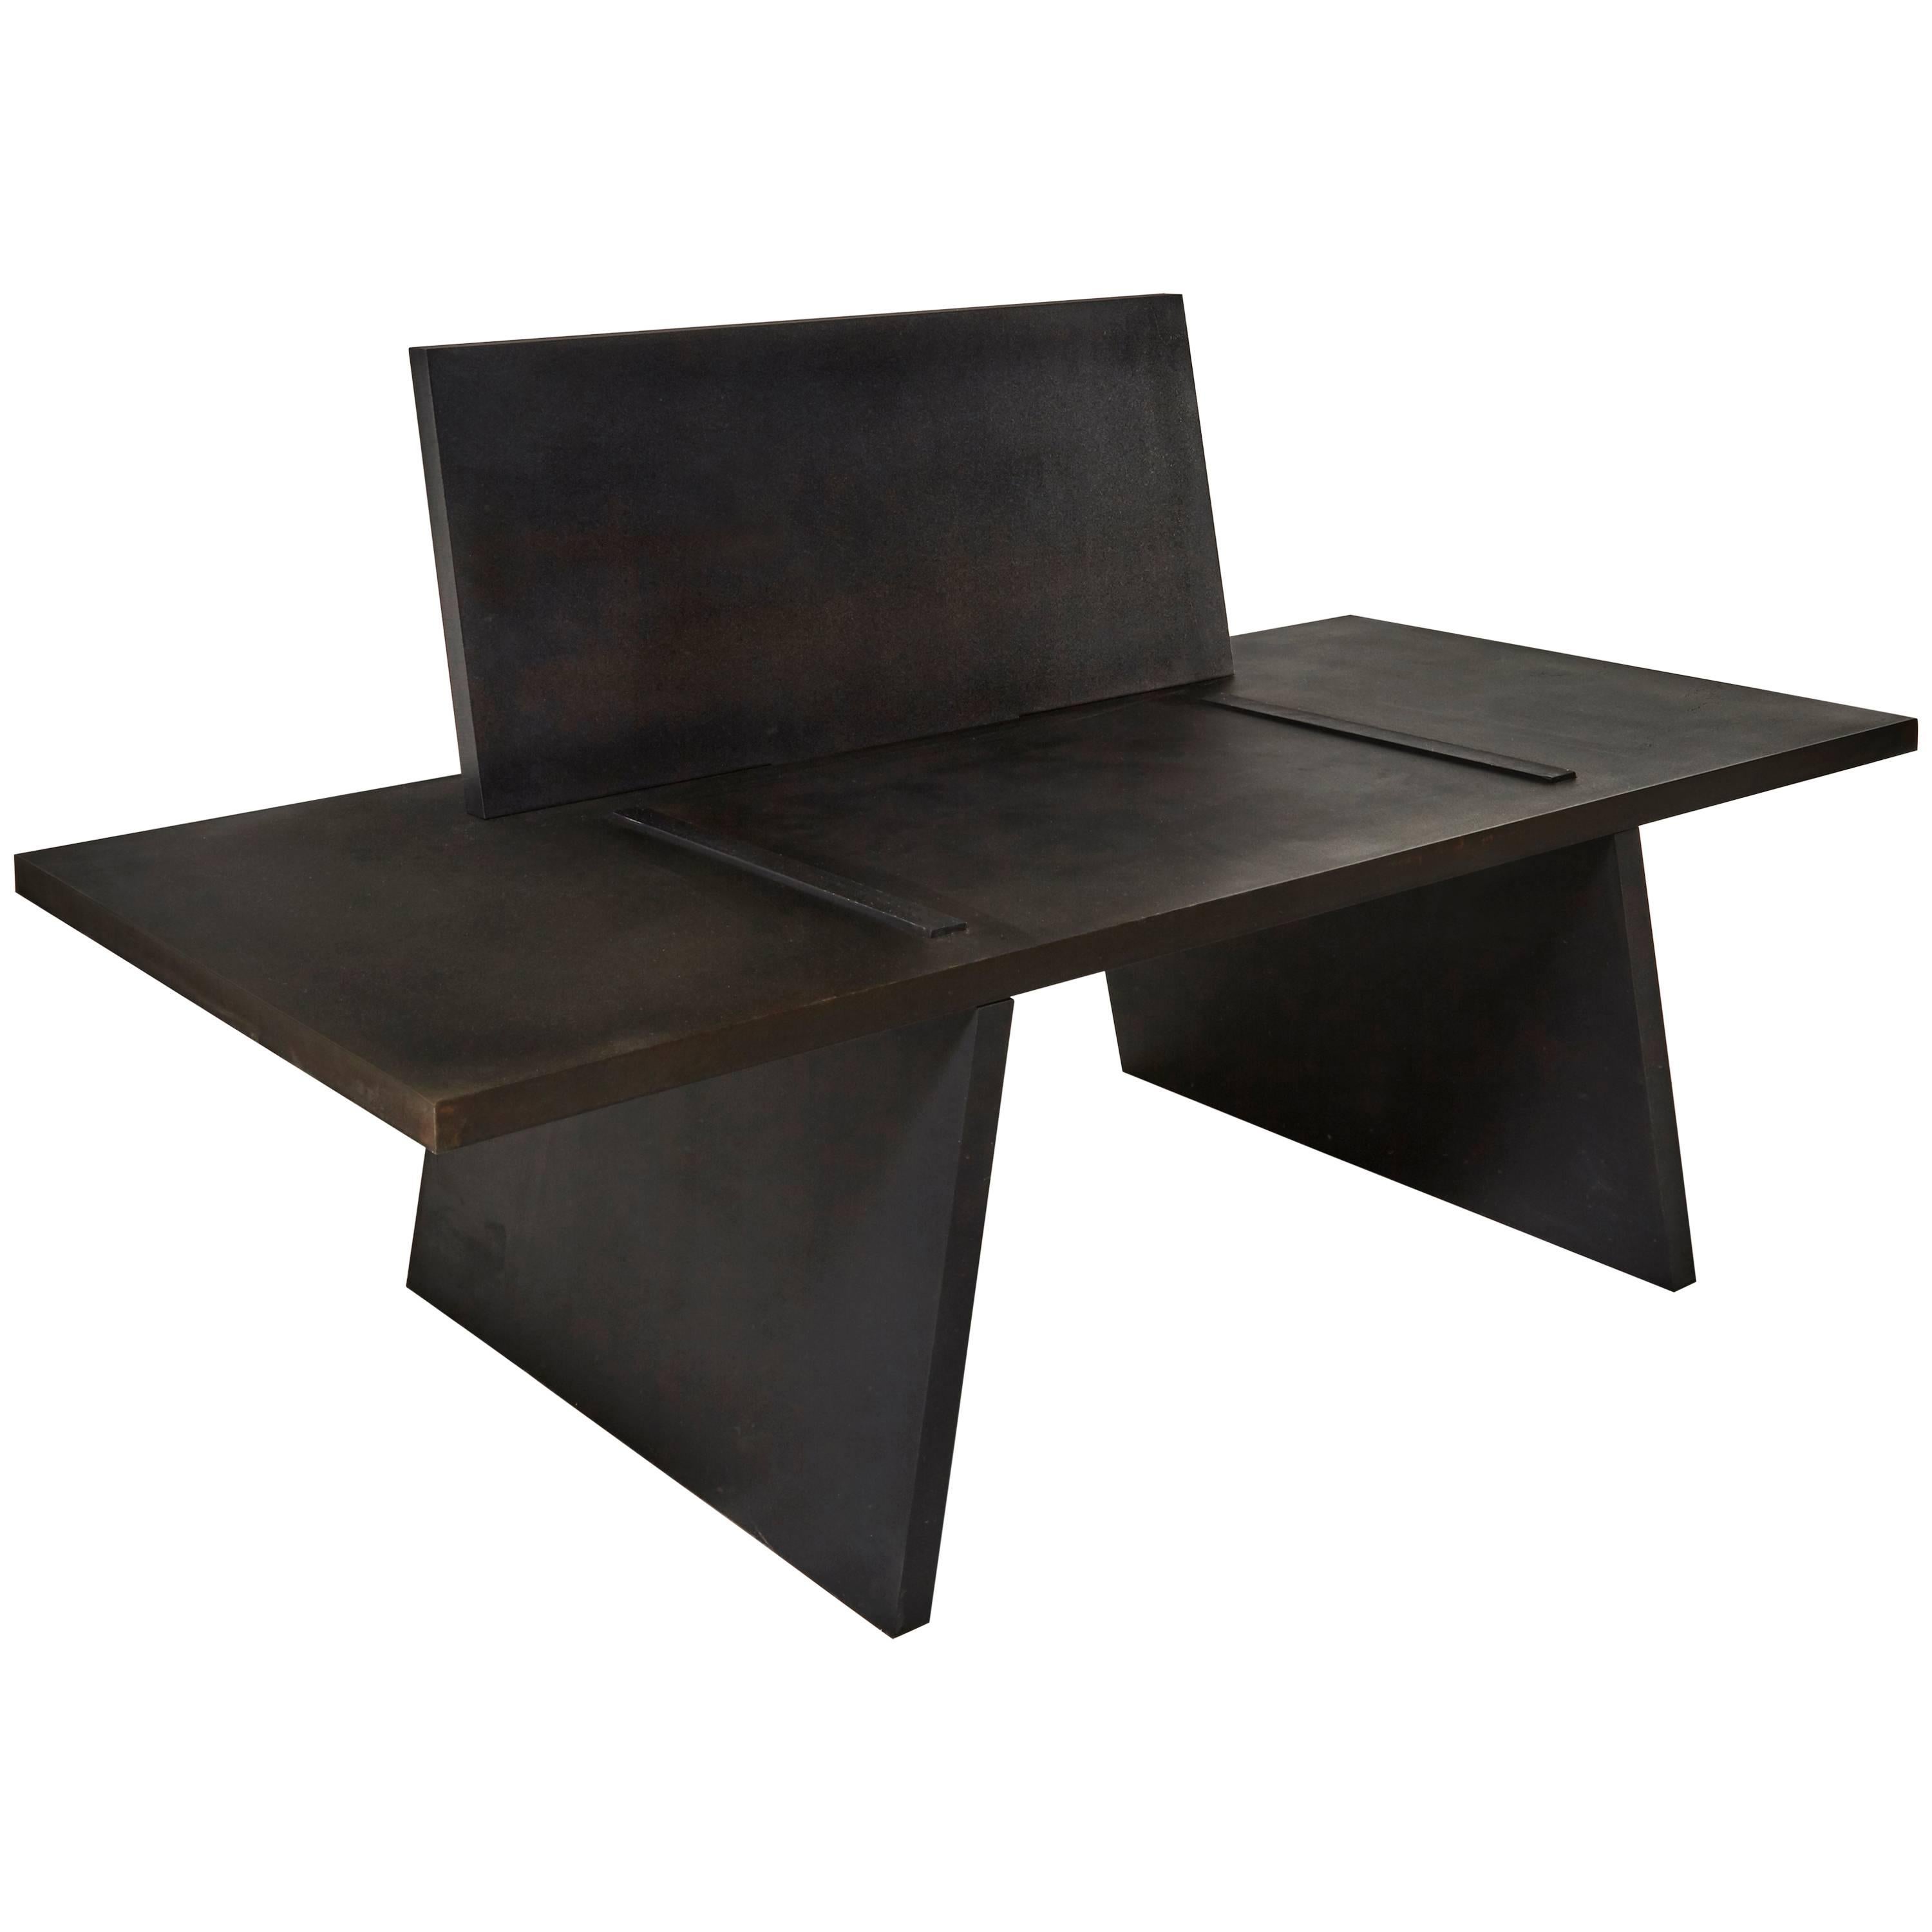  Gravity Chair in Blackened and Waxed Steel Plate by Eric Slayton